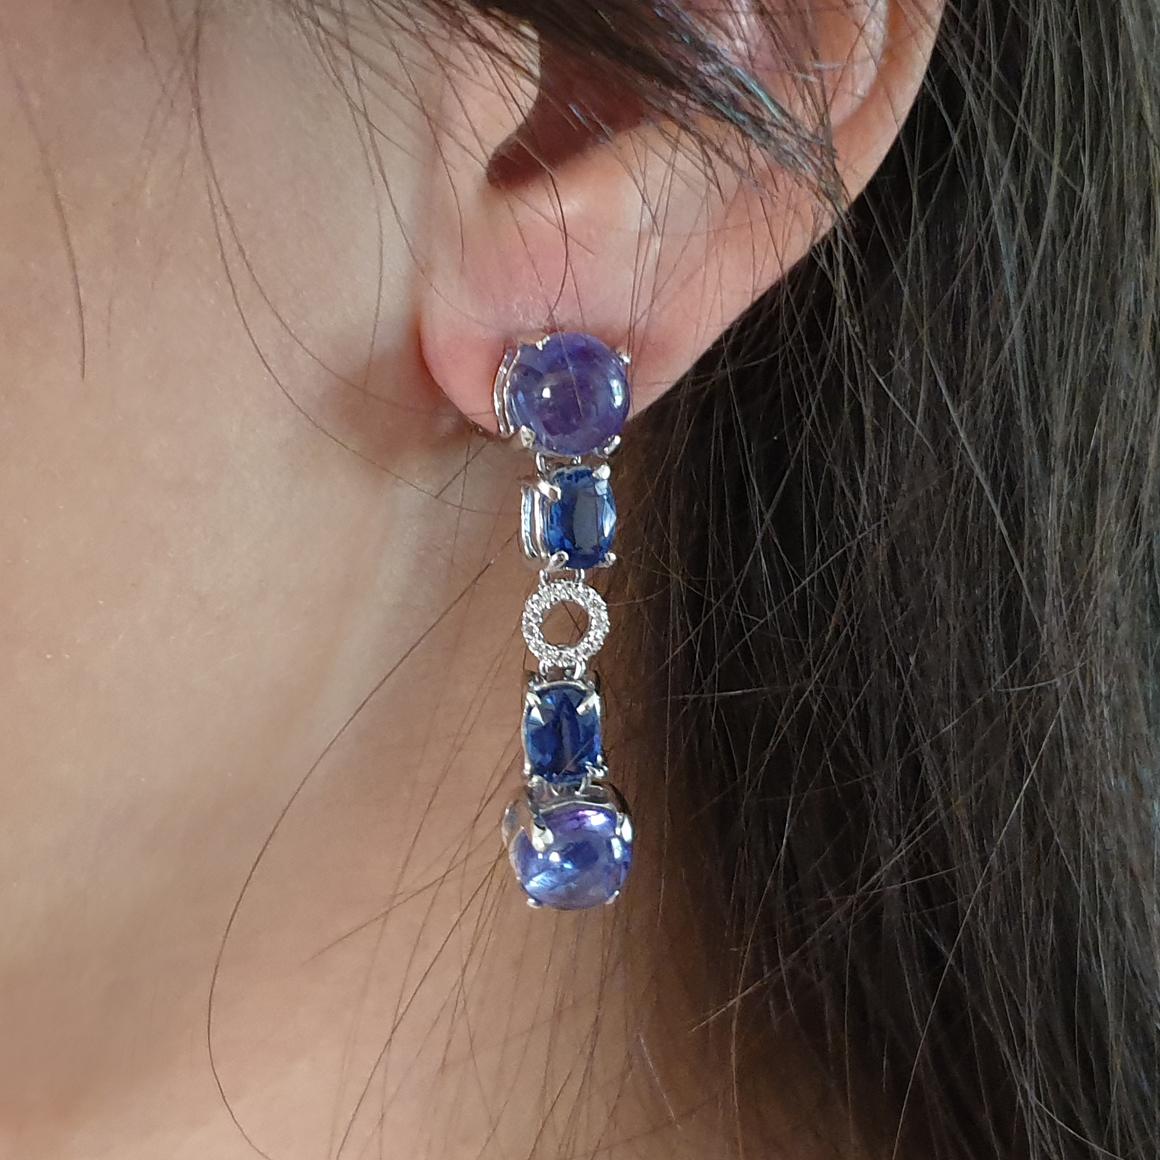 Modern 18Kt White Gold with White Diamonds and Tanzanite Earrings